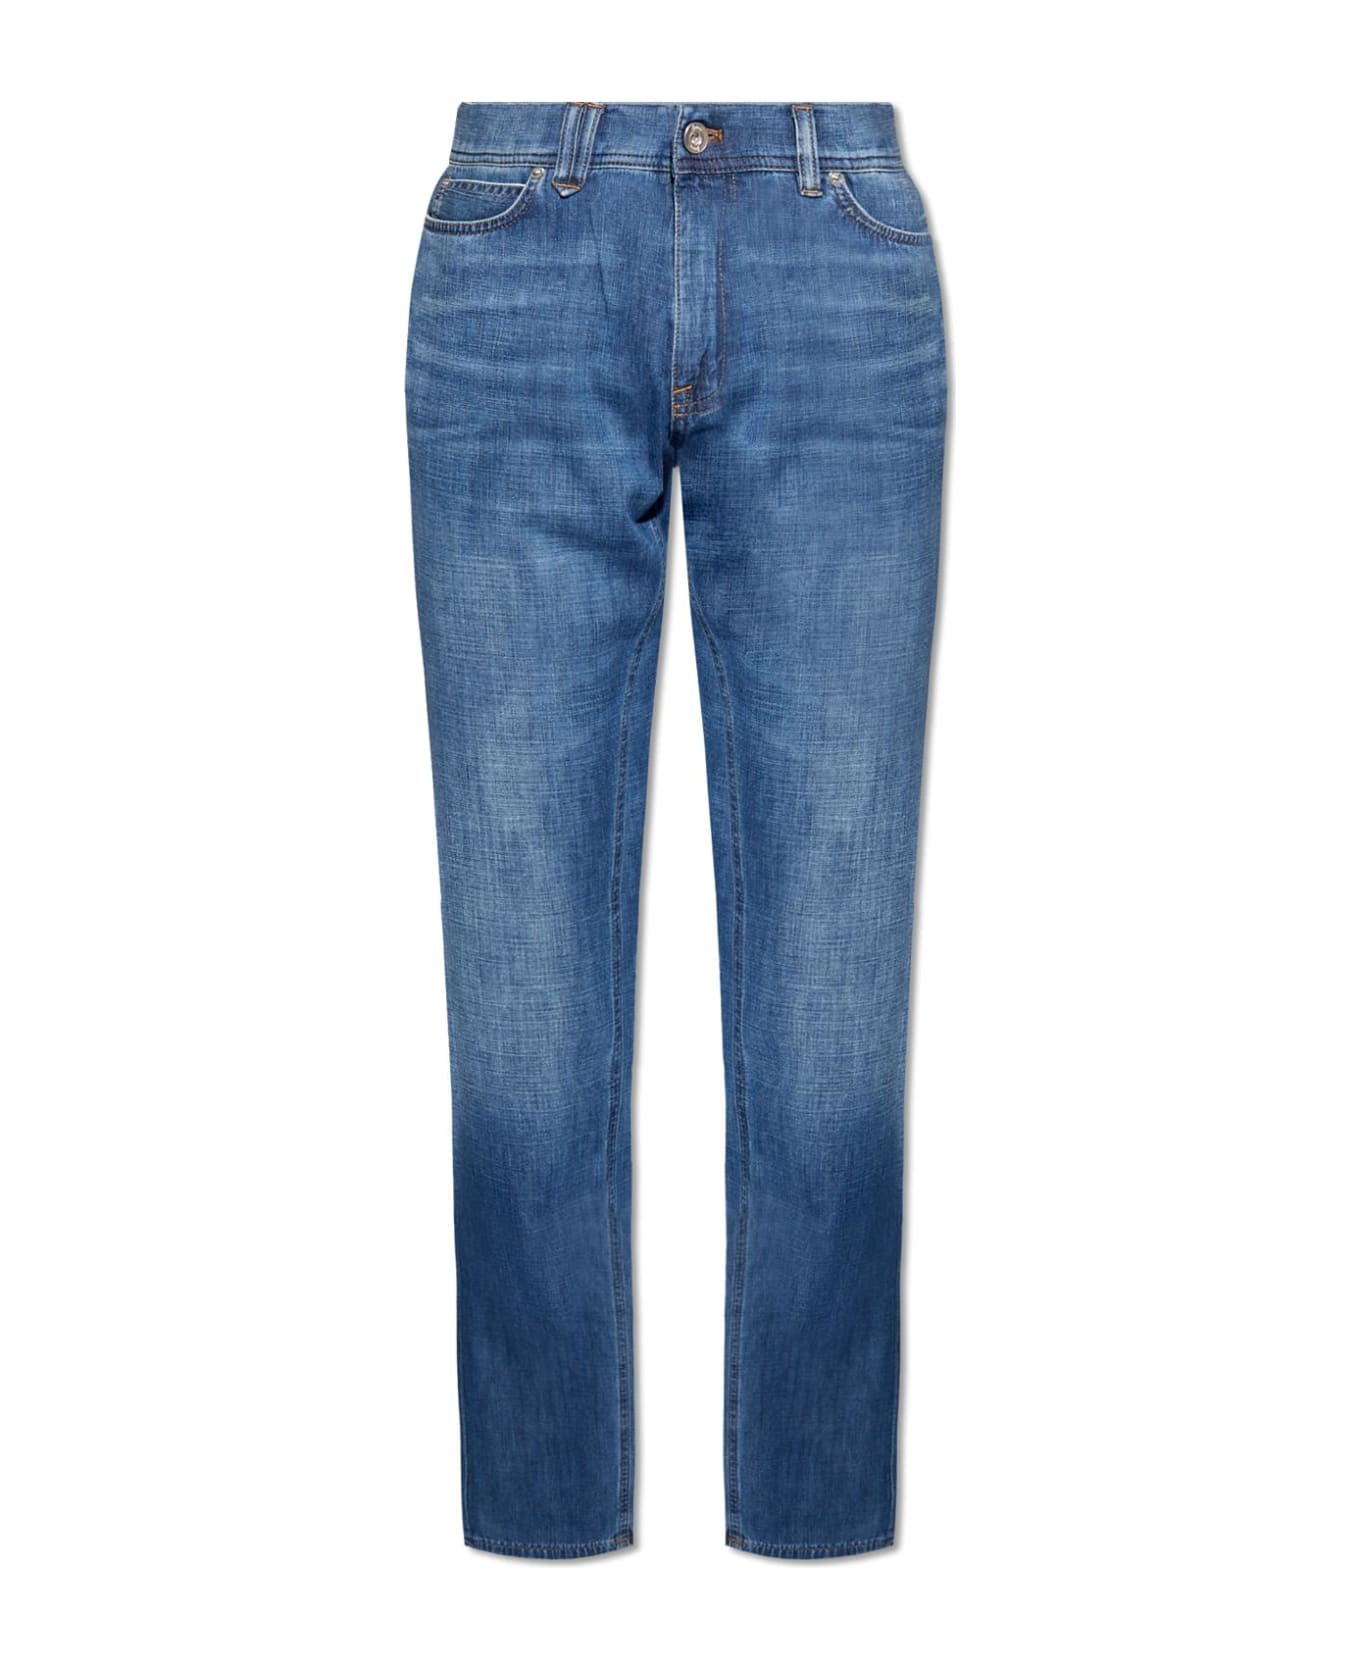 Brioni Jeans With Straight Legs - AZURE デニム